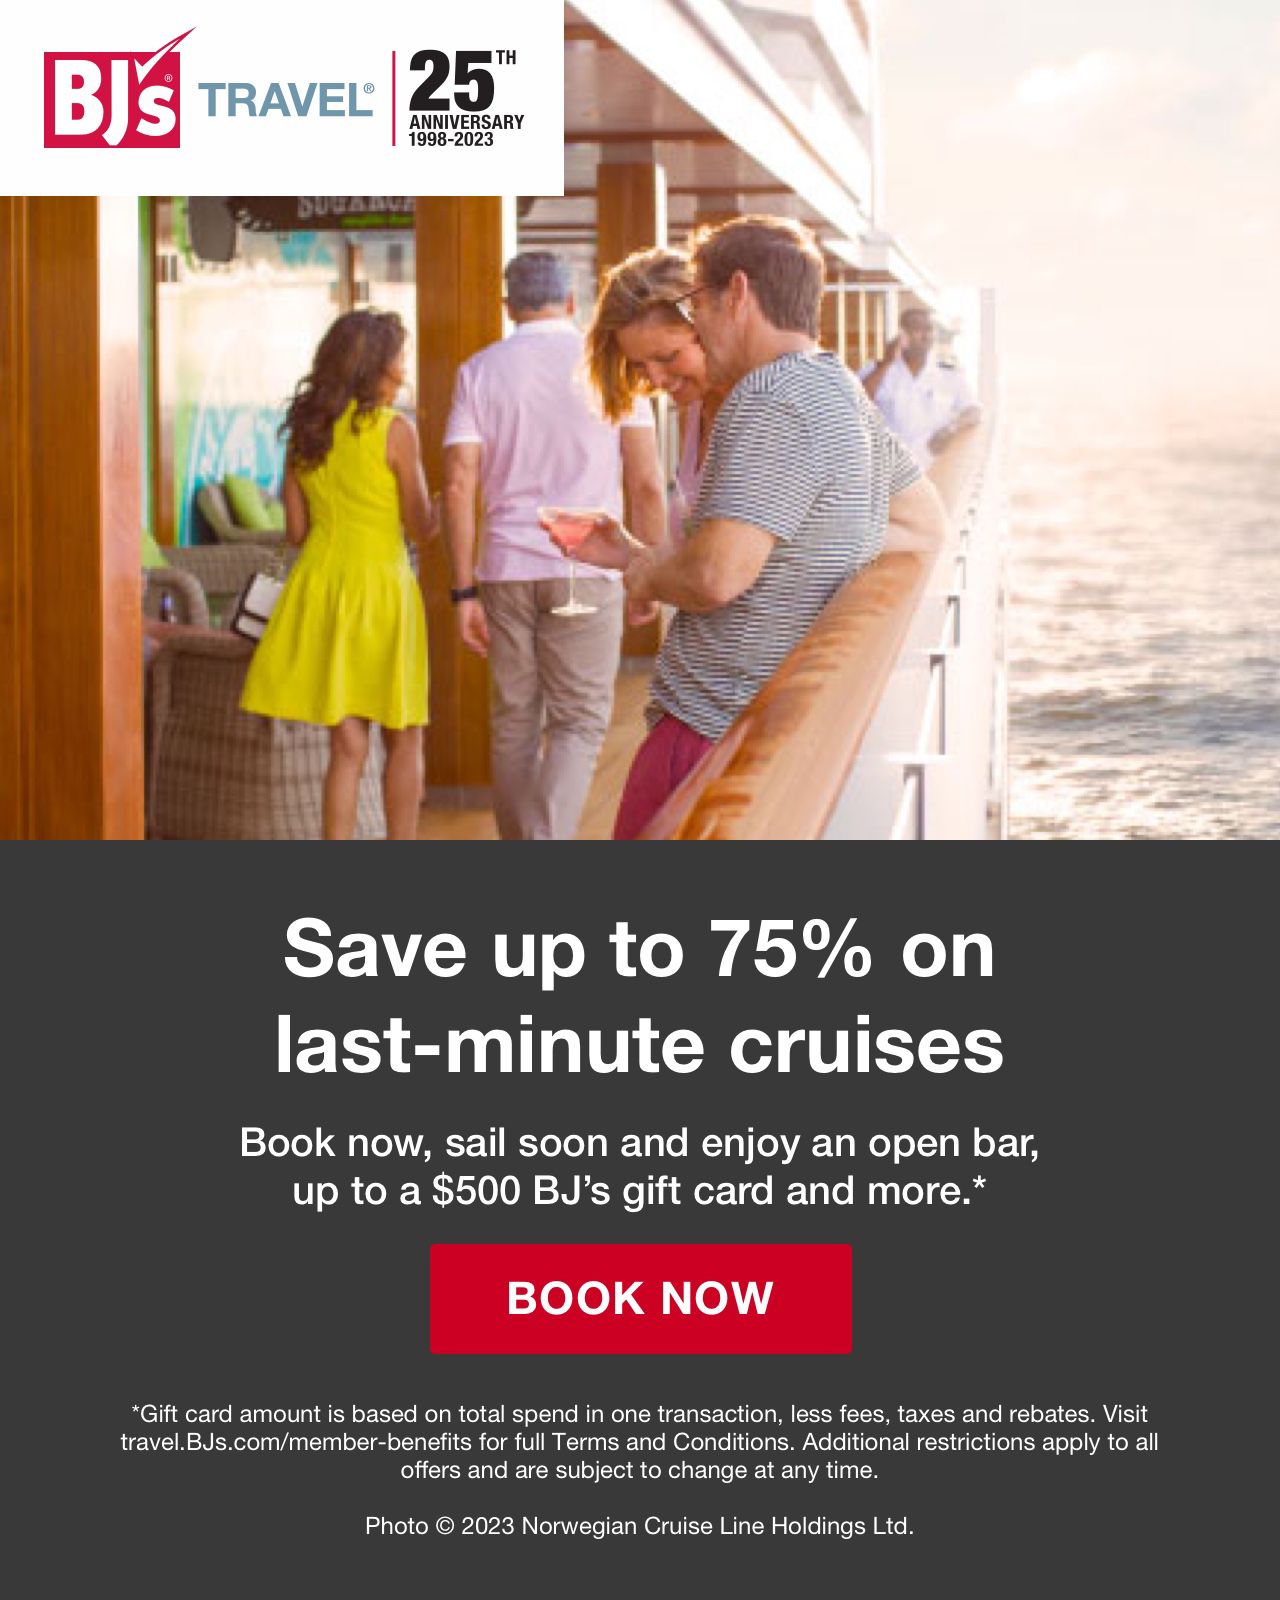 Save up to 75% on last-minute cruises. Book now, sail soon and enjoy an open bar, up to a $500 BJ's gift card and more.* Click to book now